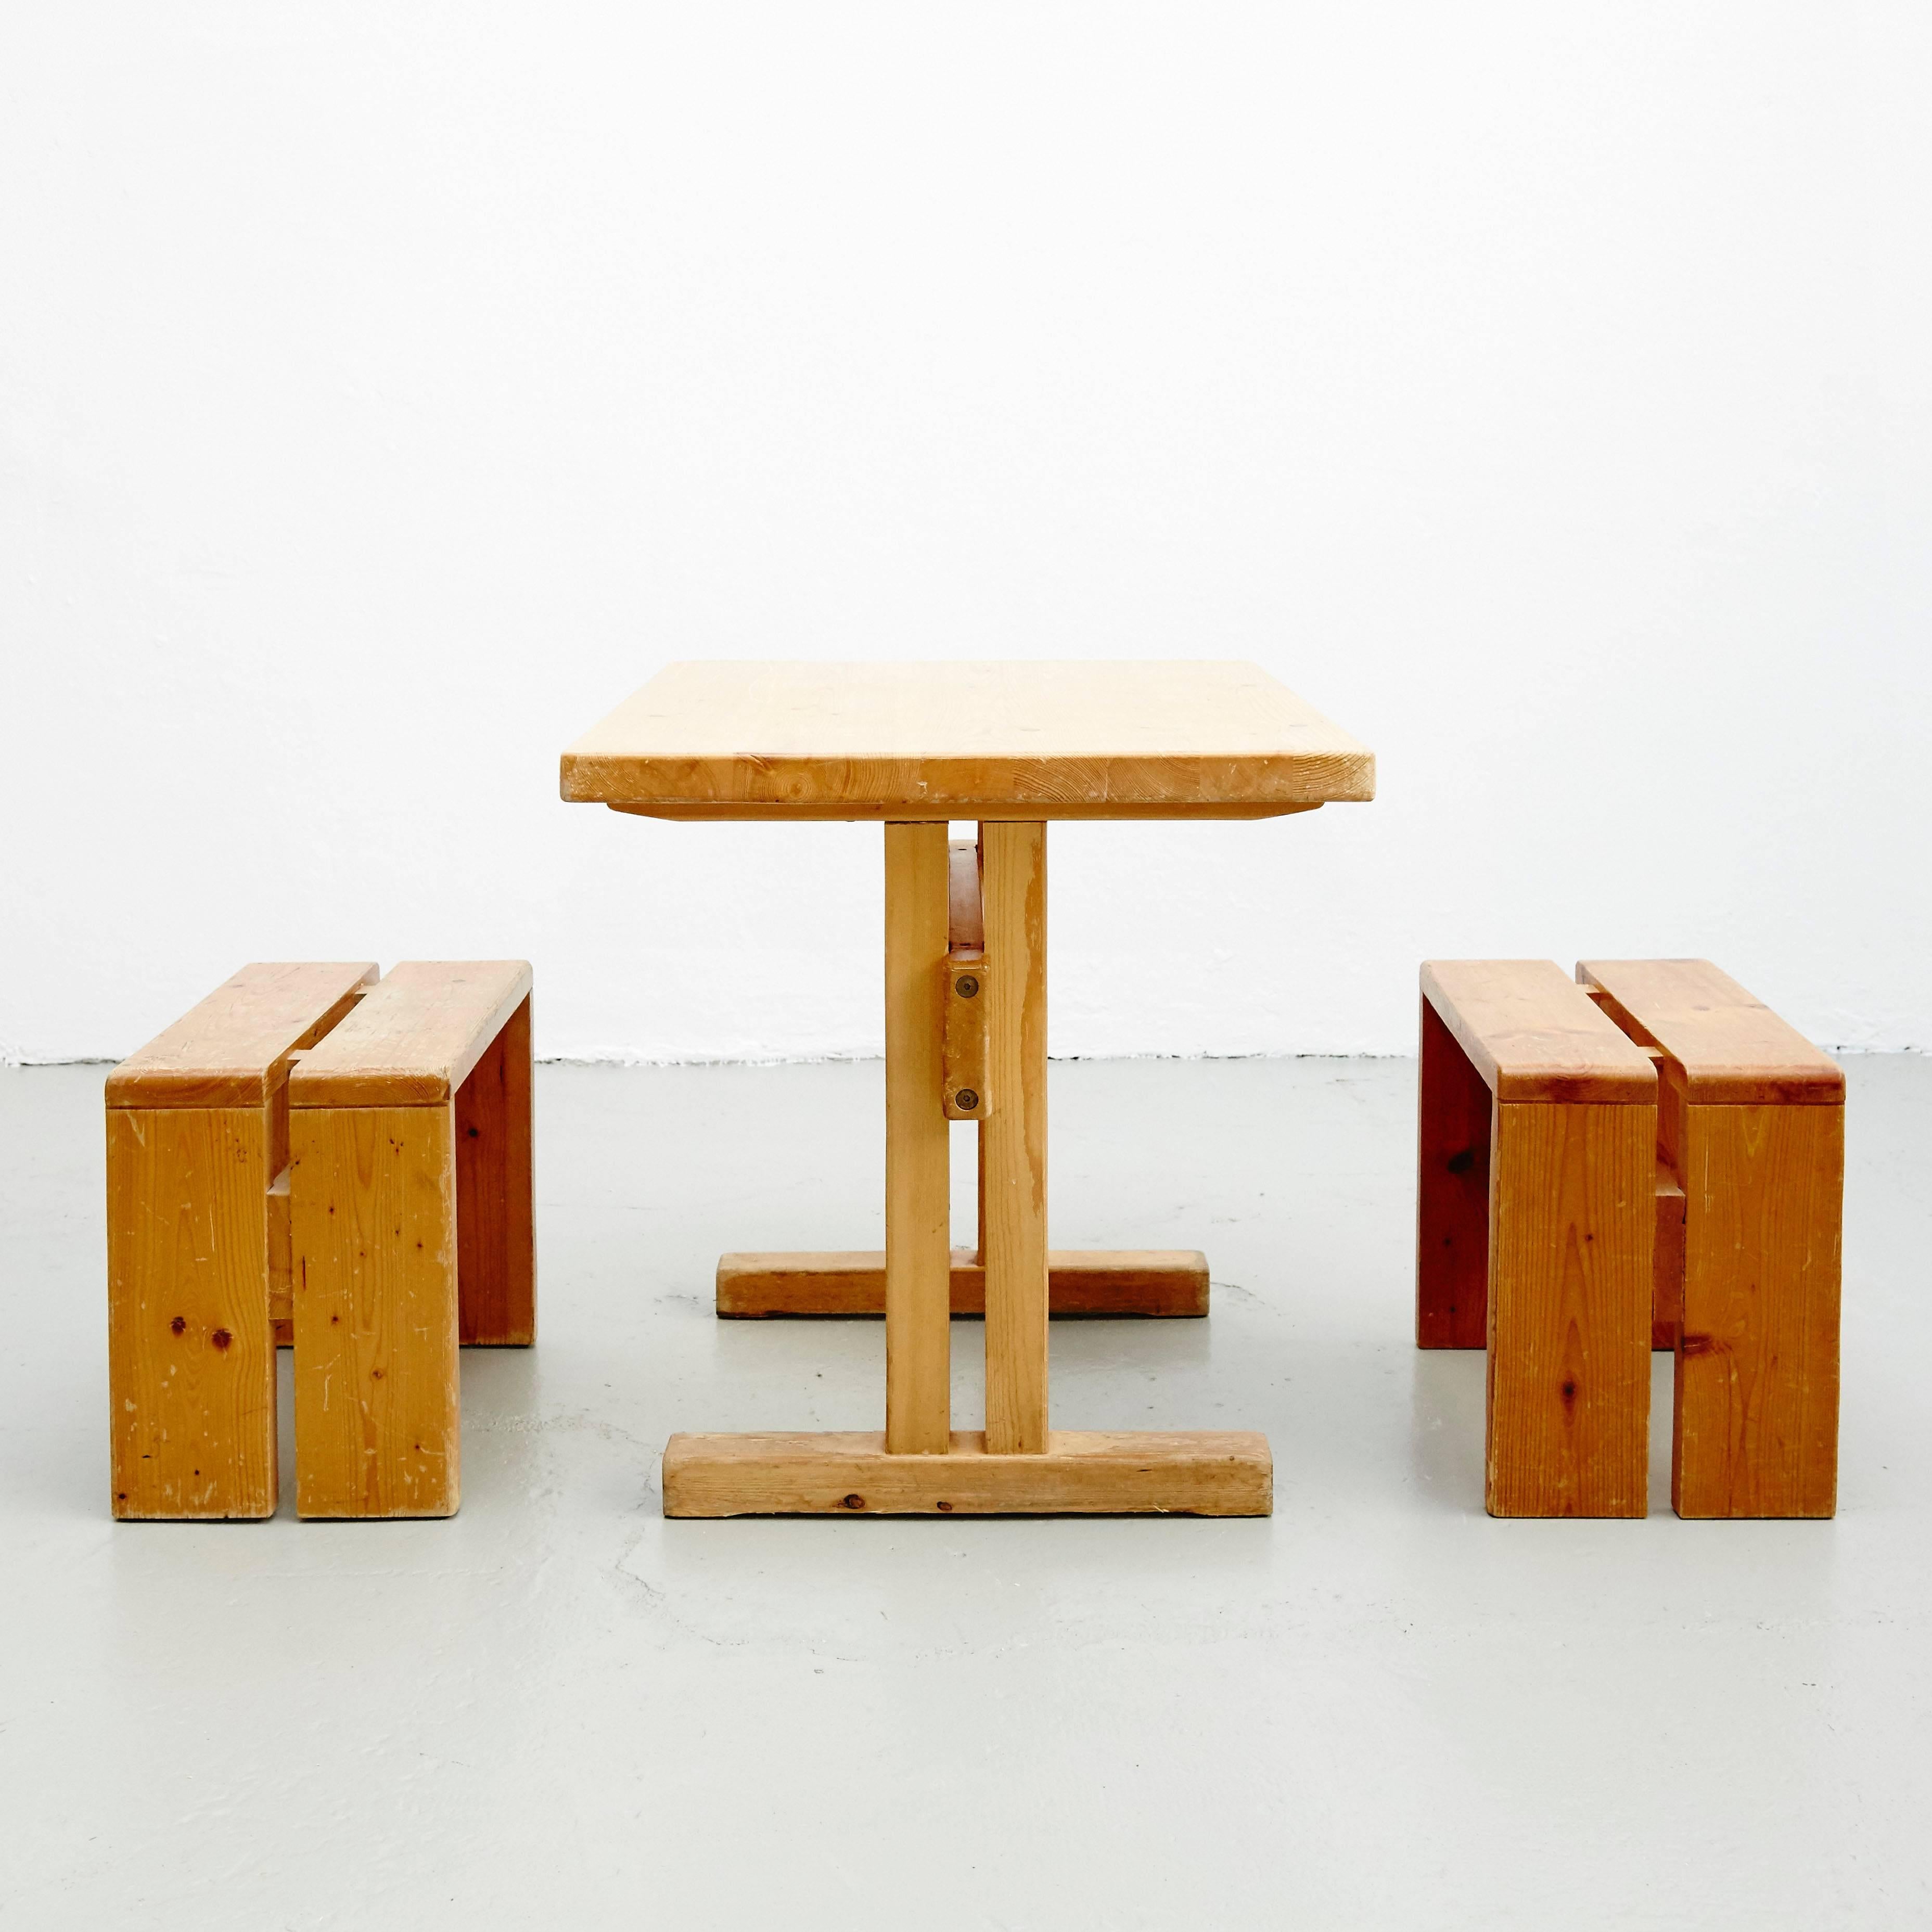 Set of table and stools designed by Charlotte Perriand for Les Arcs ski Resort circa 1960, manufactured in France.

Pinewood.

In good original condition, with minor wear consistent with age and use, preserving a beautiful patina.

Charlotte